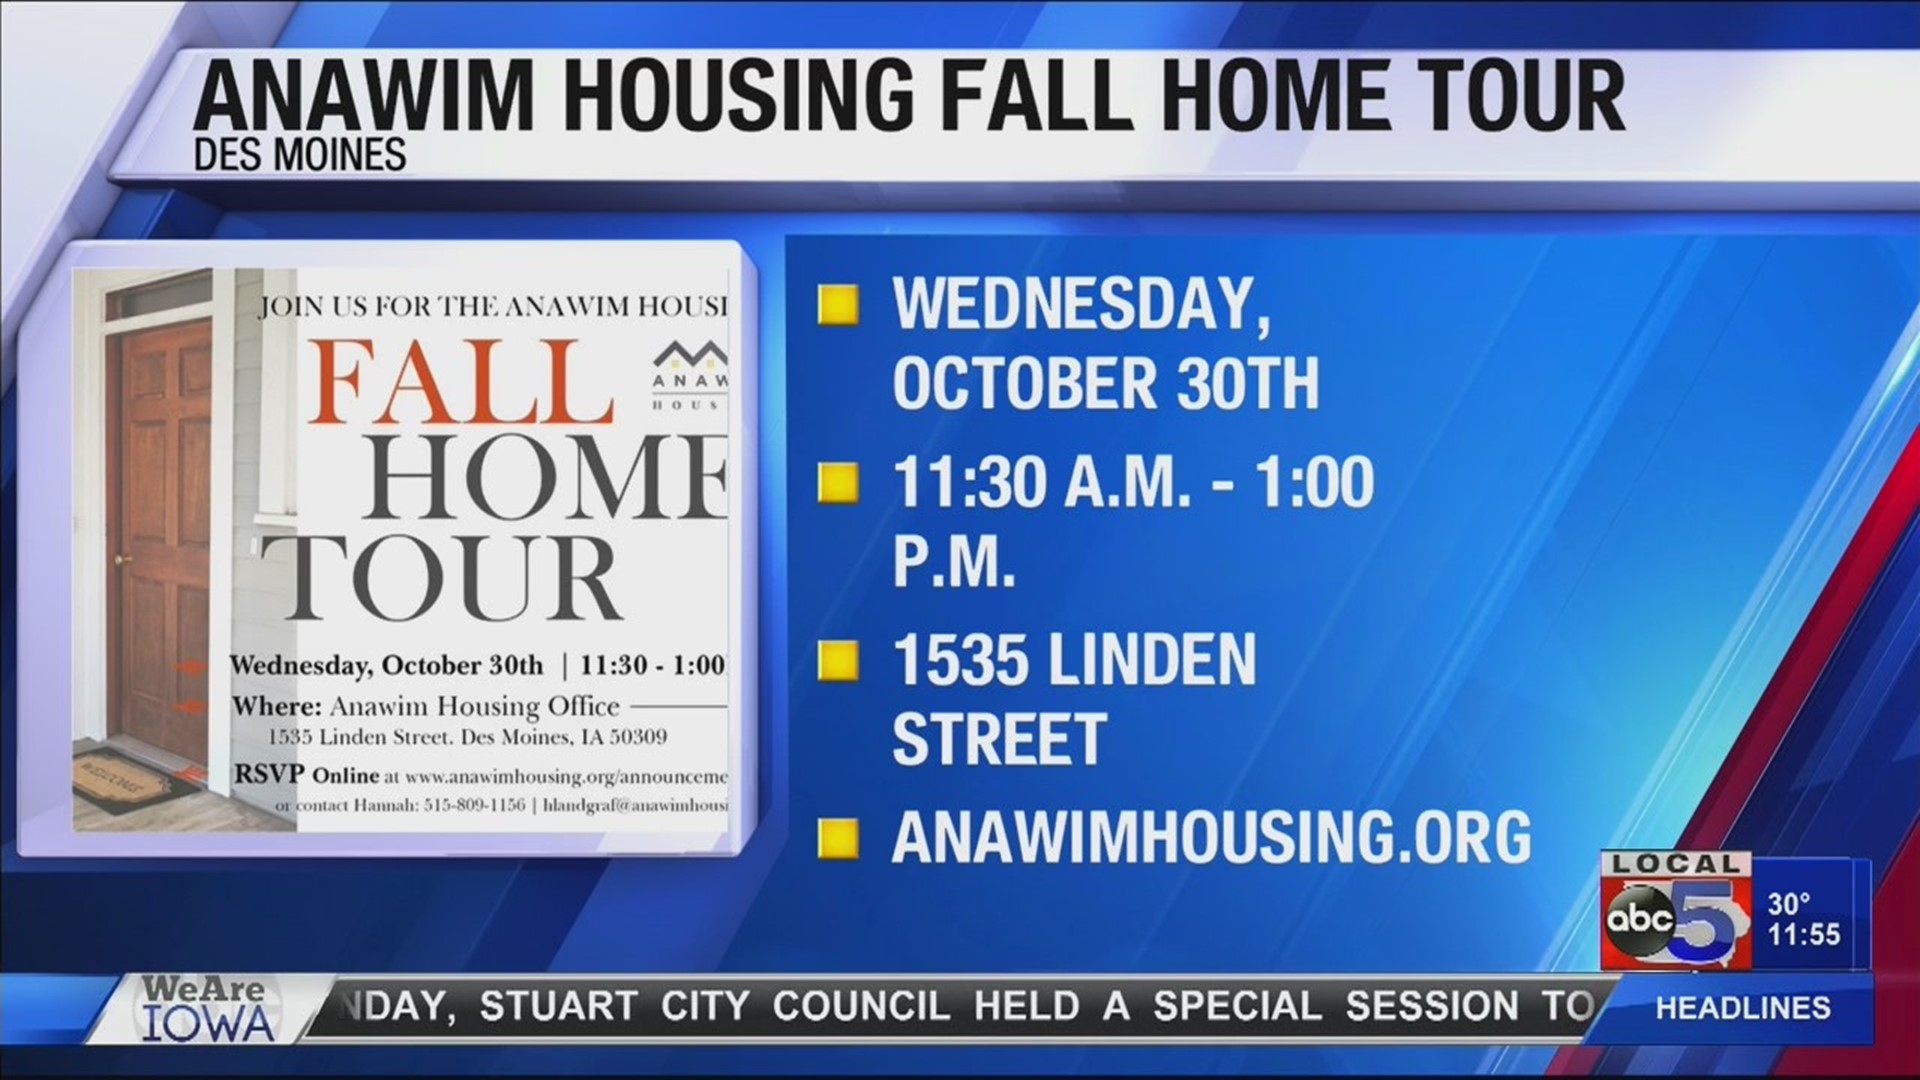 Anawim Housing Fall Home Tour is Wednesday, October 30th.